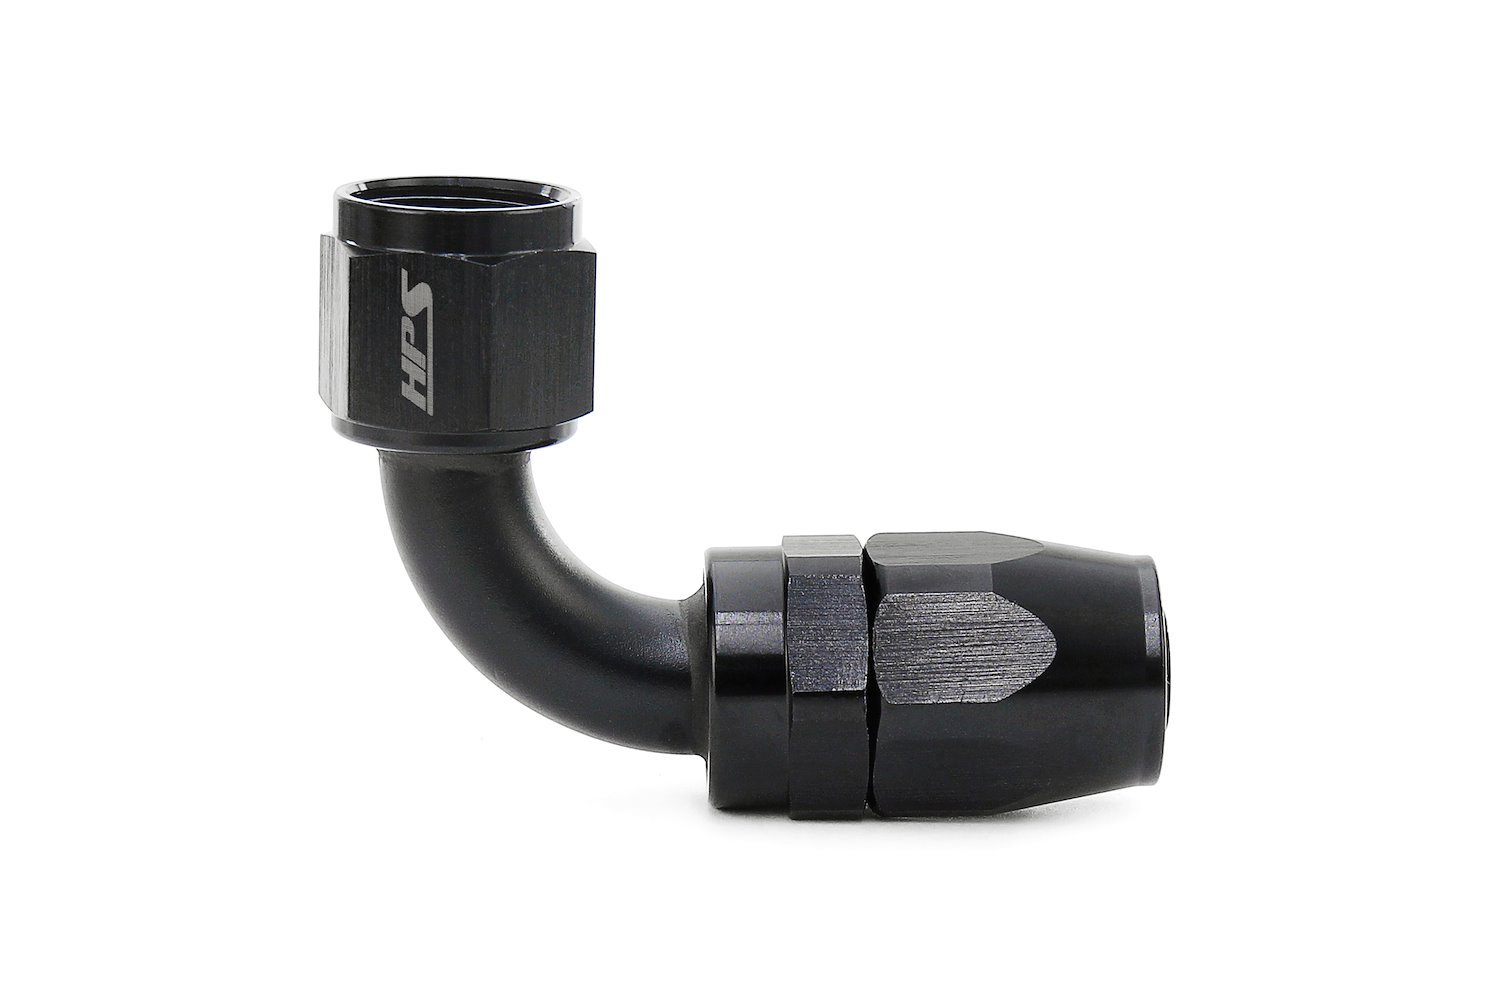 250-9010 250 Series 90-Deg Hose End, Reusable Compression Style Hose End Fitting, Easily Assembles w/ Hand Tools